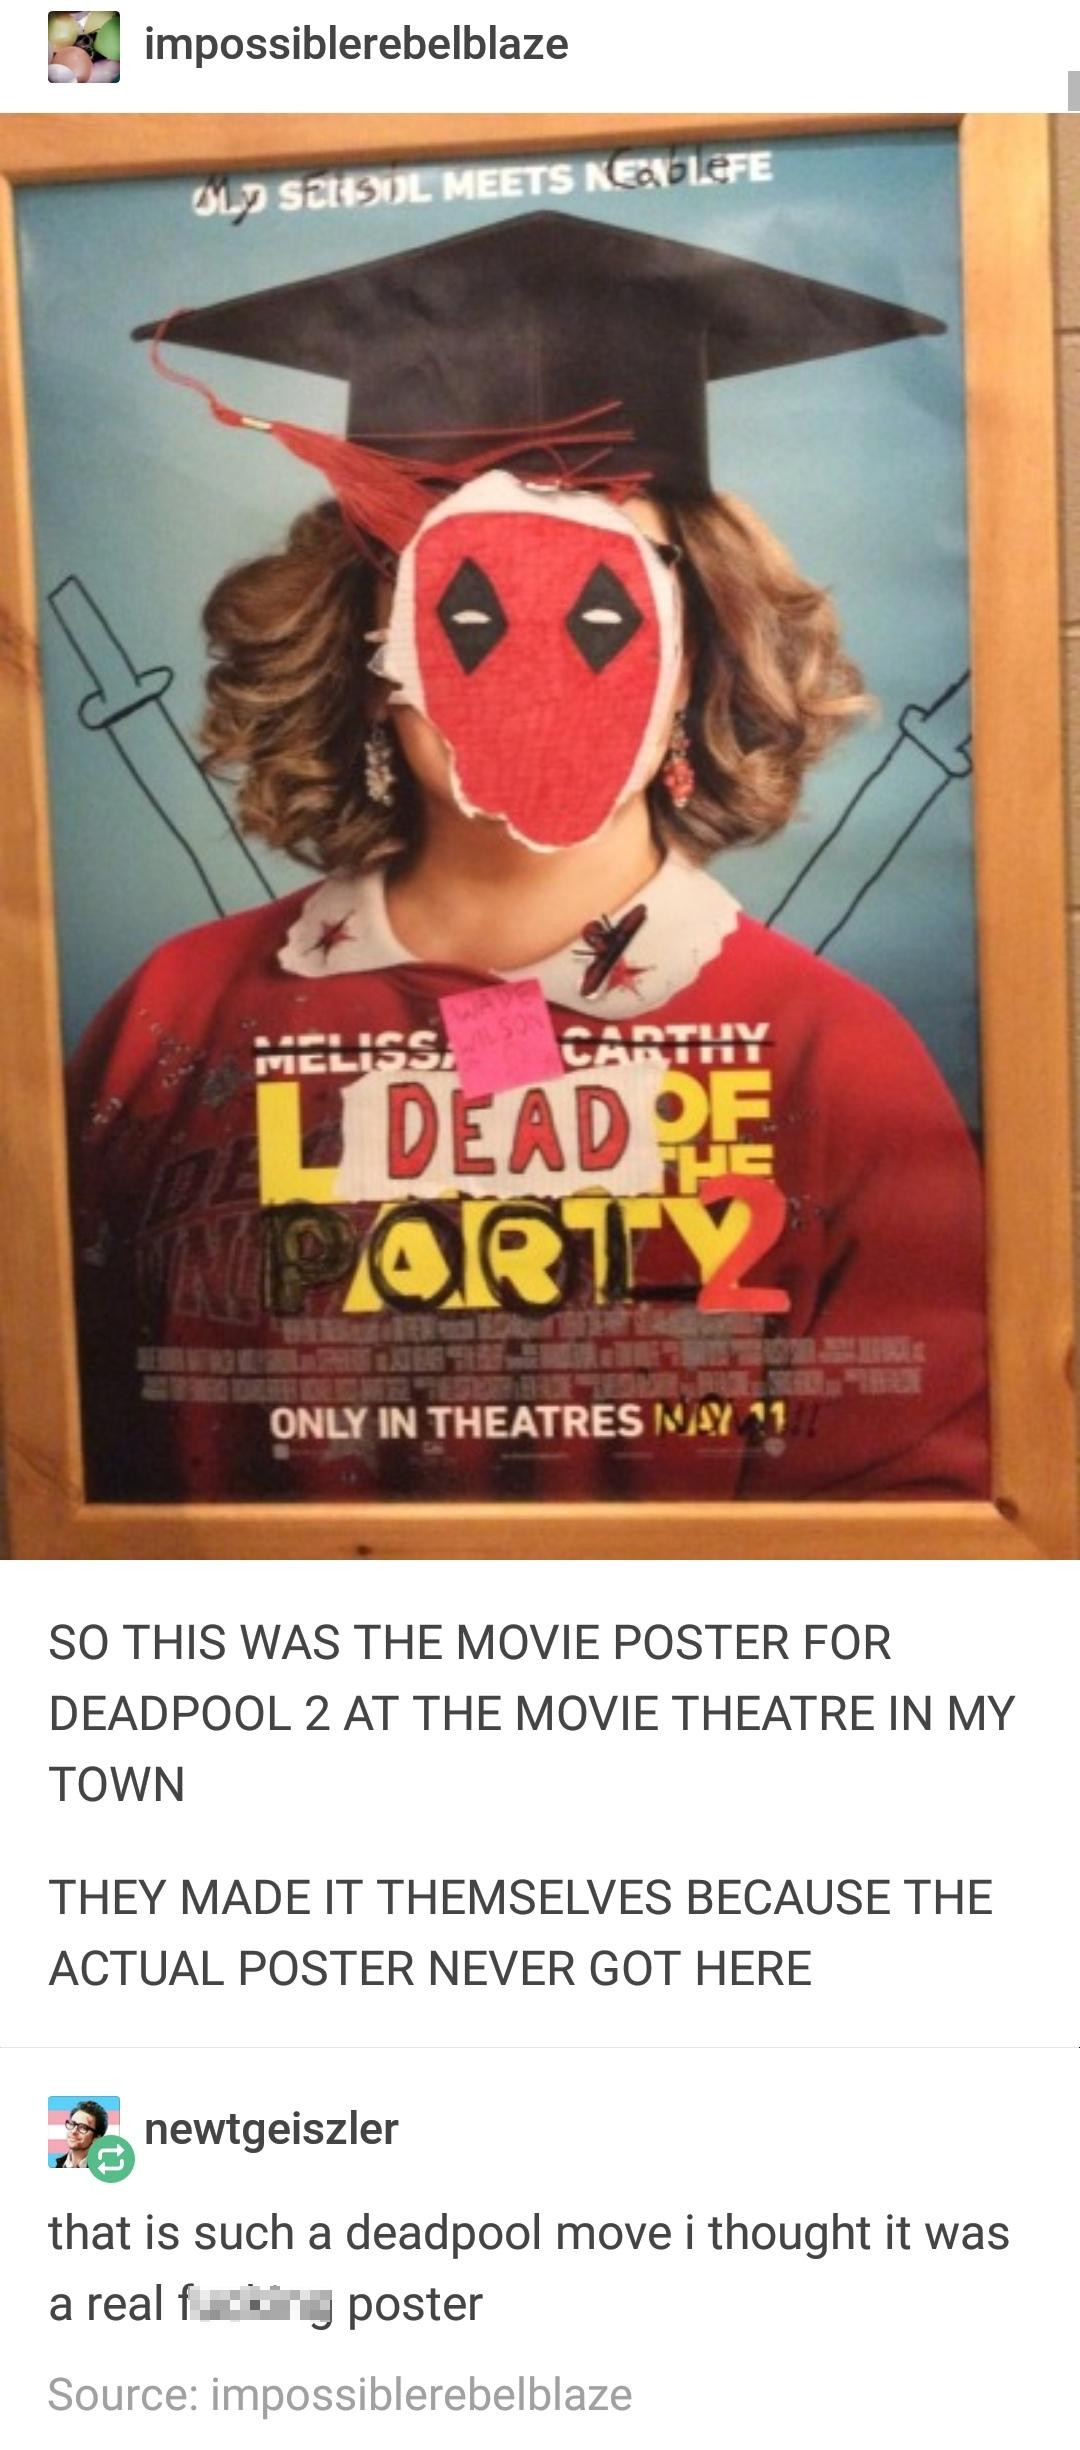 fake deadpool poster - impossiblerebelblaze 01. SCI30L Meets Reife Ilson Meliss, U Deadre Torty Only In Theatres My 11 So This Was The Movie Poster For Deadpool 2 At The Movie Theatre In My Town They Made It Themselves Because The Actual Poster Never Got 